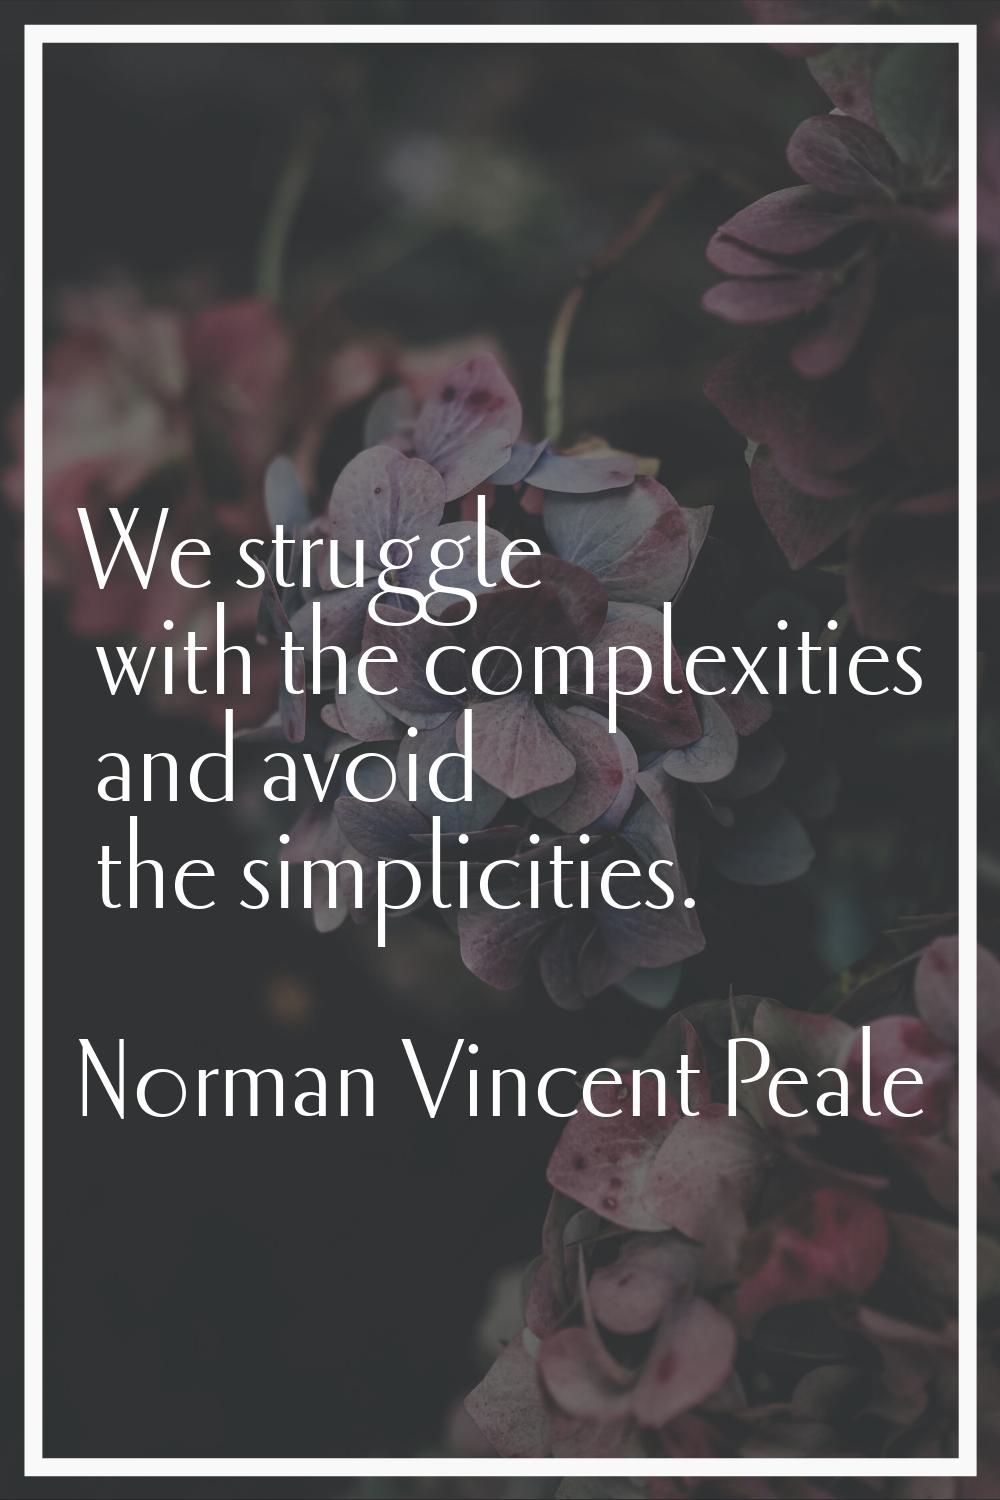 We struggle with the complexities and avoid the simplicities.